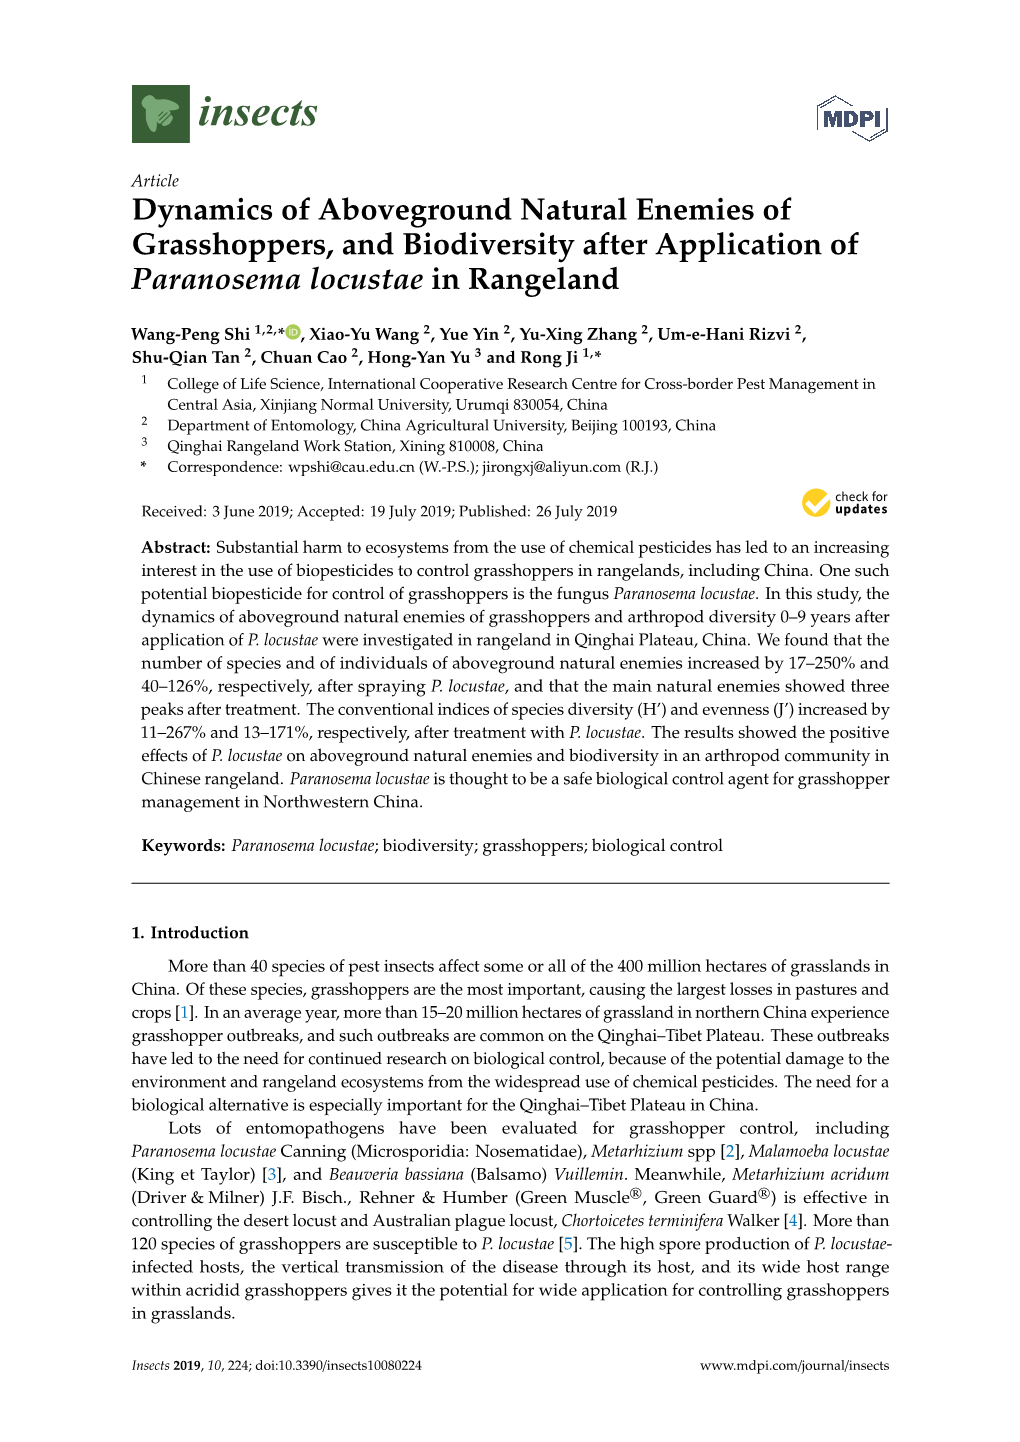 Dynamics of Aboveground Natural Enemies of Grasshoppers, and Biodiversity After Application of Paranosema Locustae in Rangeland